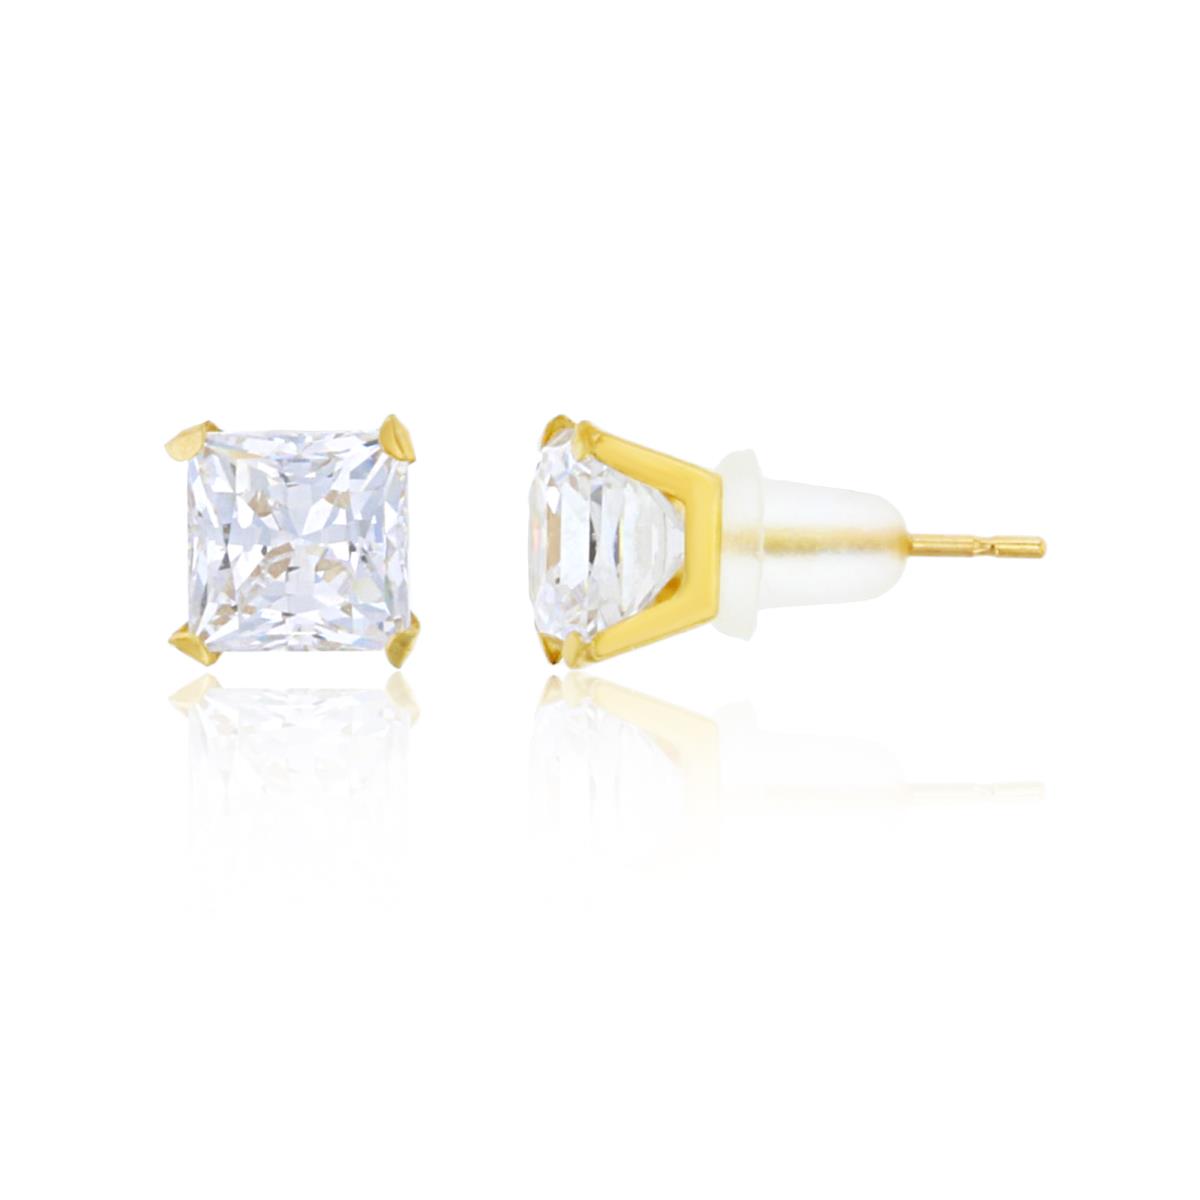 14K Yellow Gold 7.00mm 4-Prong Princess Cut Solitaire Stud & 14K Silicone Back